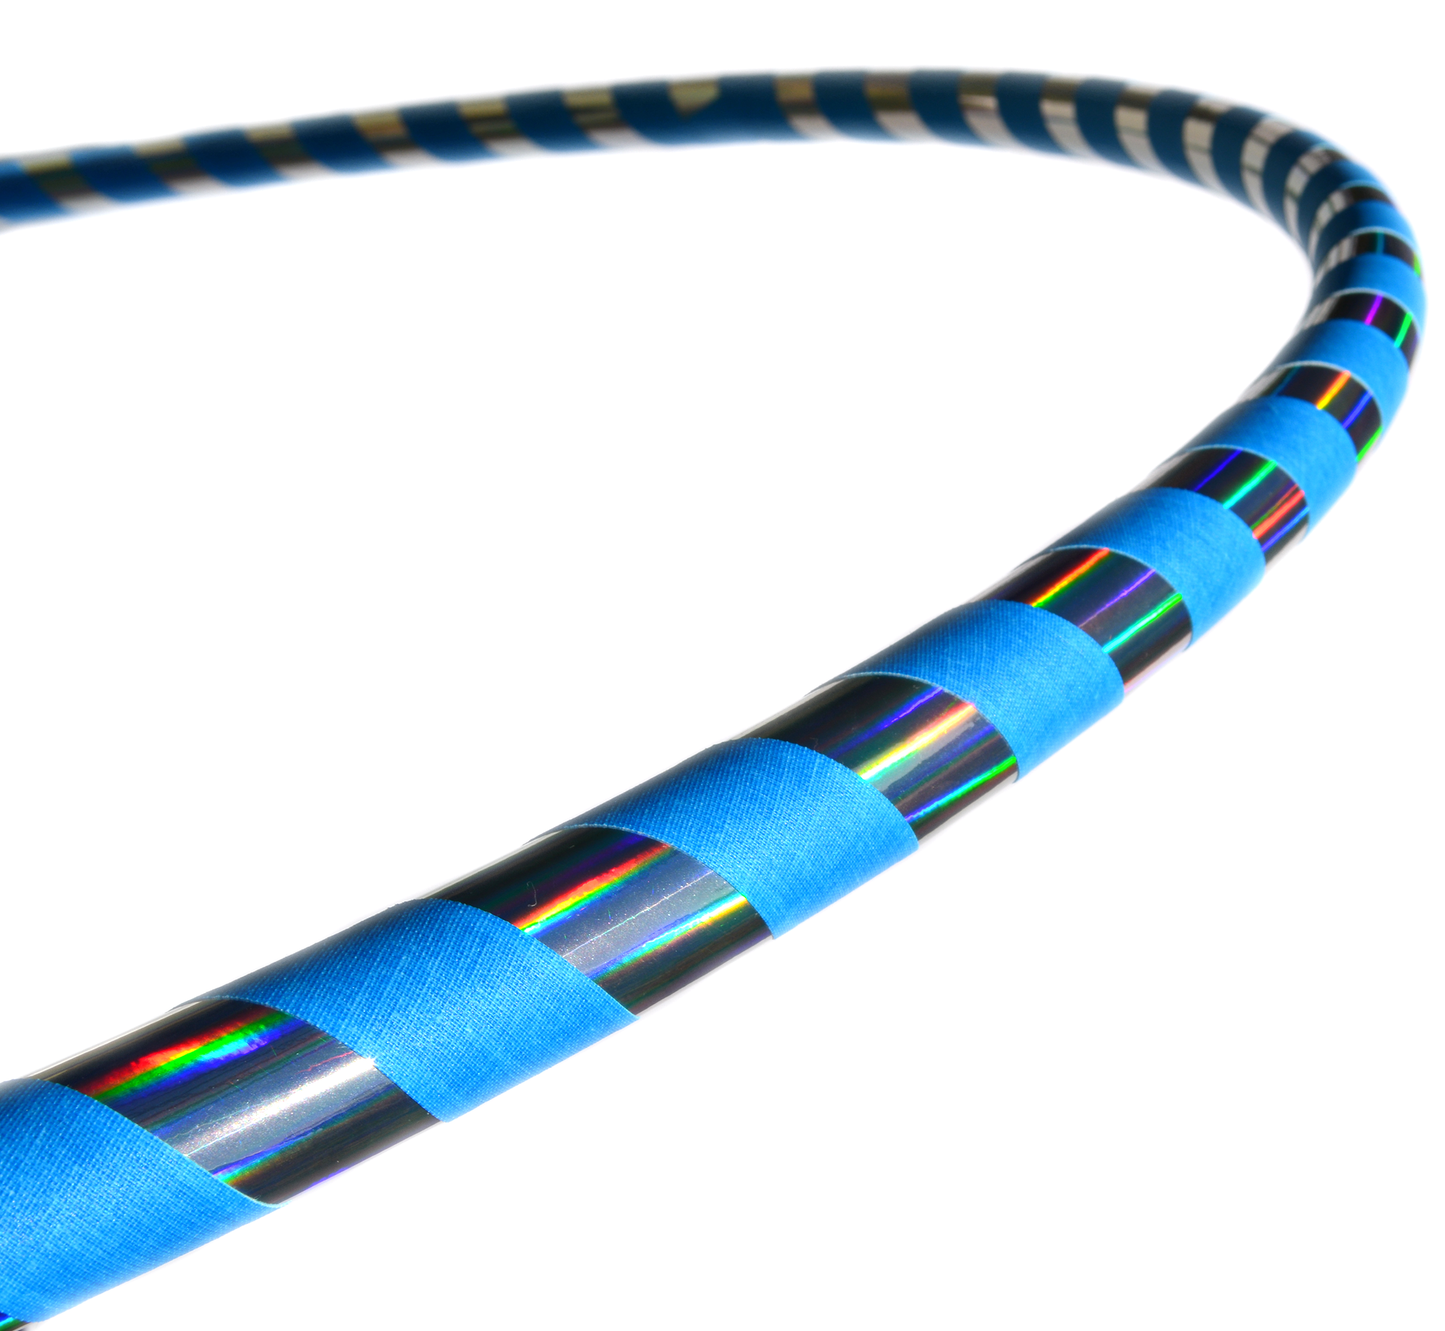 Holographic Taped Beginner Hoop - Holographic Tape w/ Gaffer Grip Tape